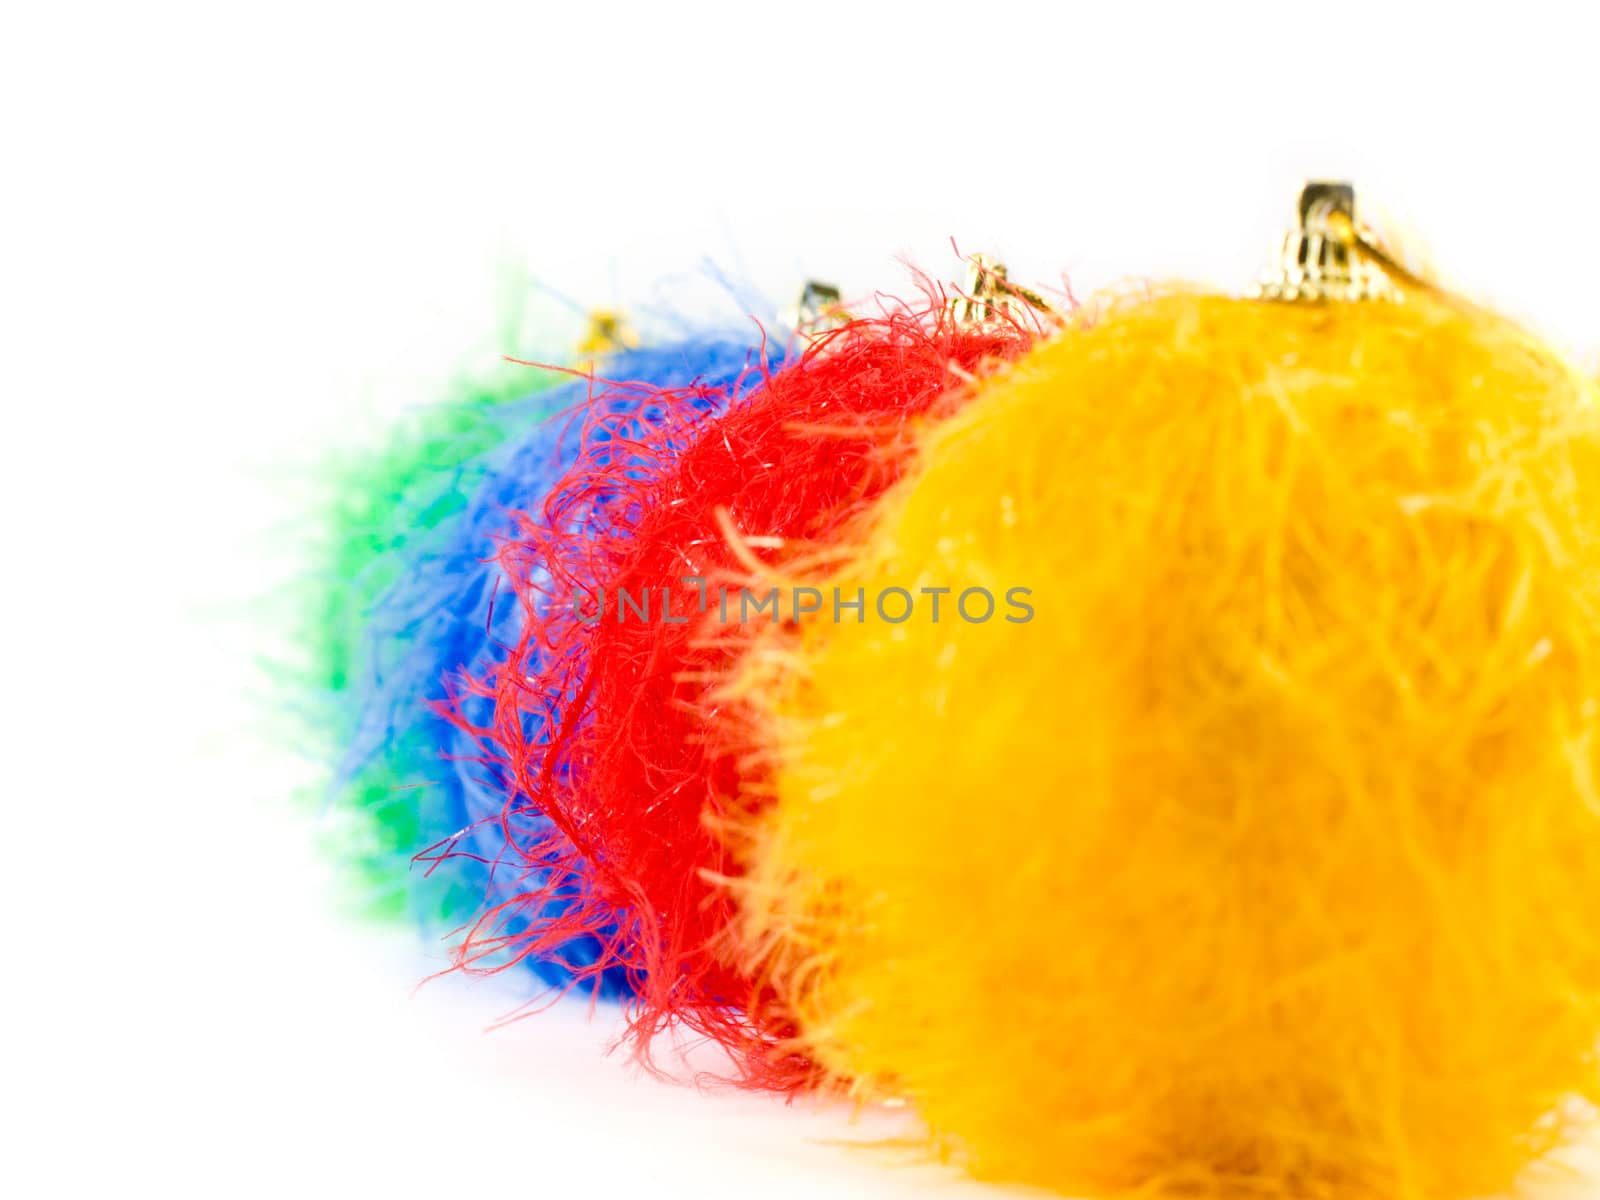 Fluffy christmas baubles on white background, focus on red bauble